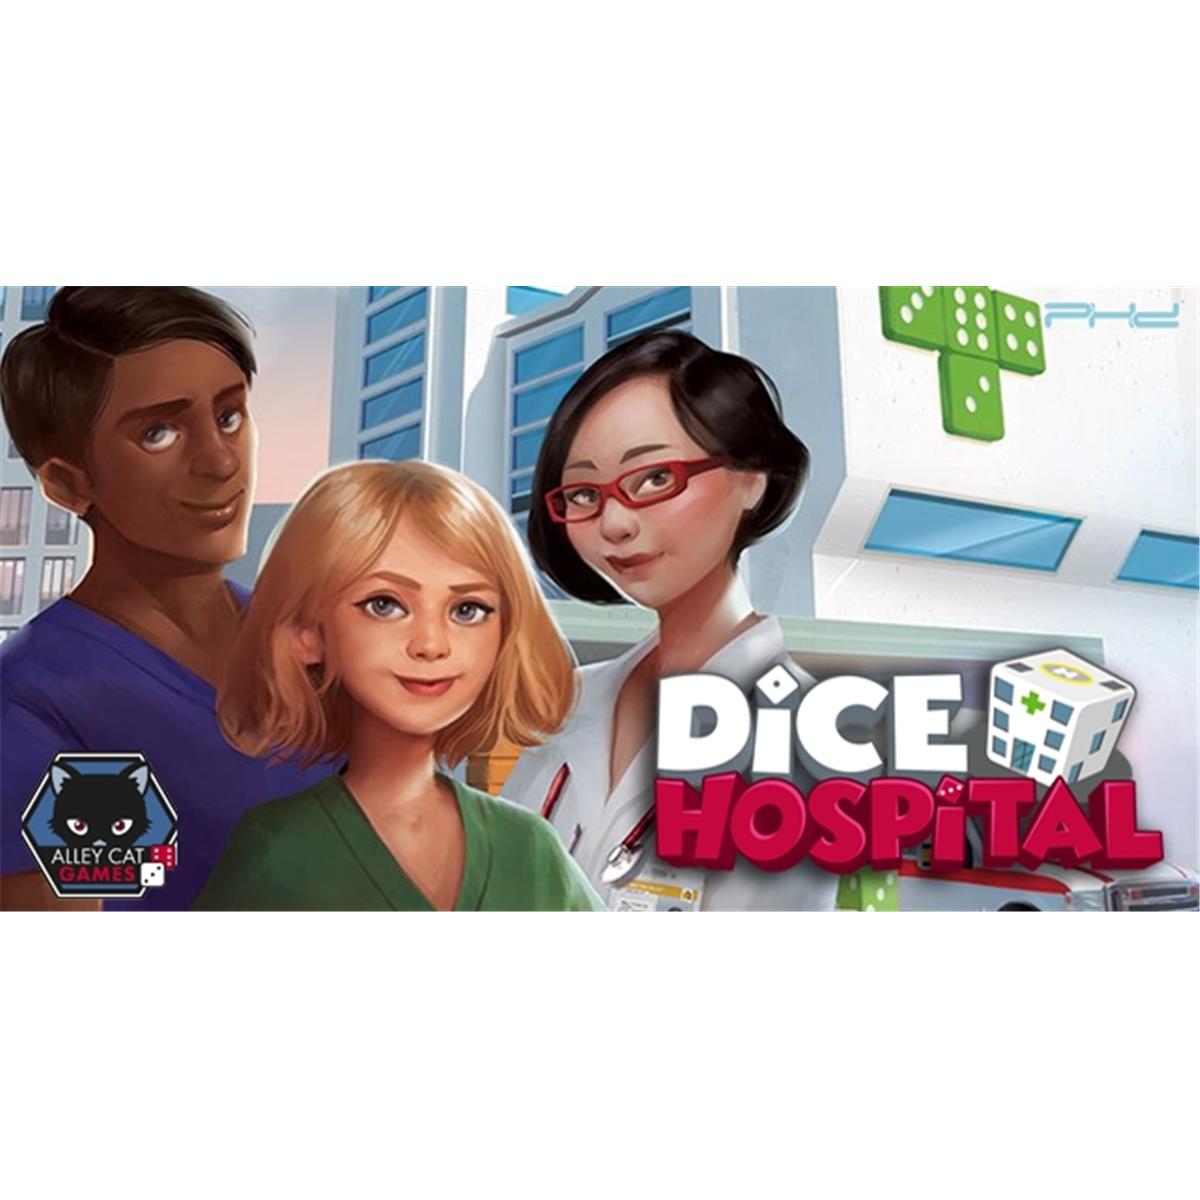 Picture of Alley Cat Games ACG005 Dice Hospital Game